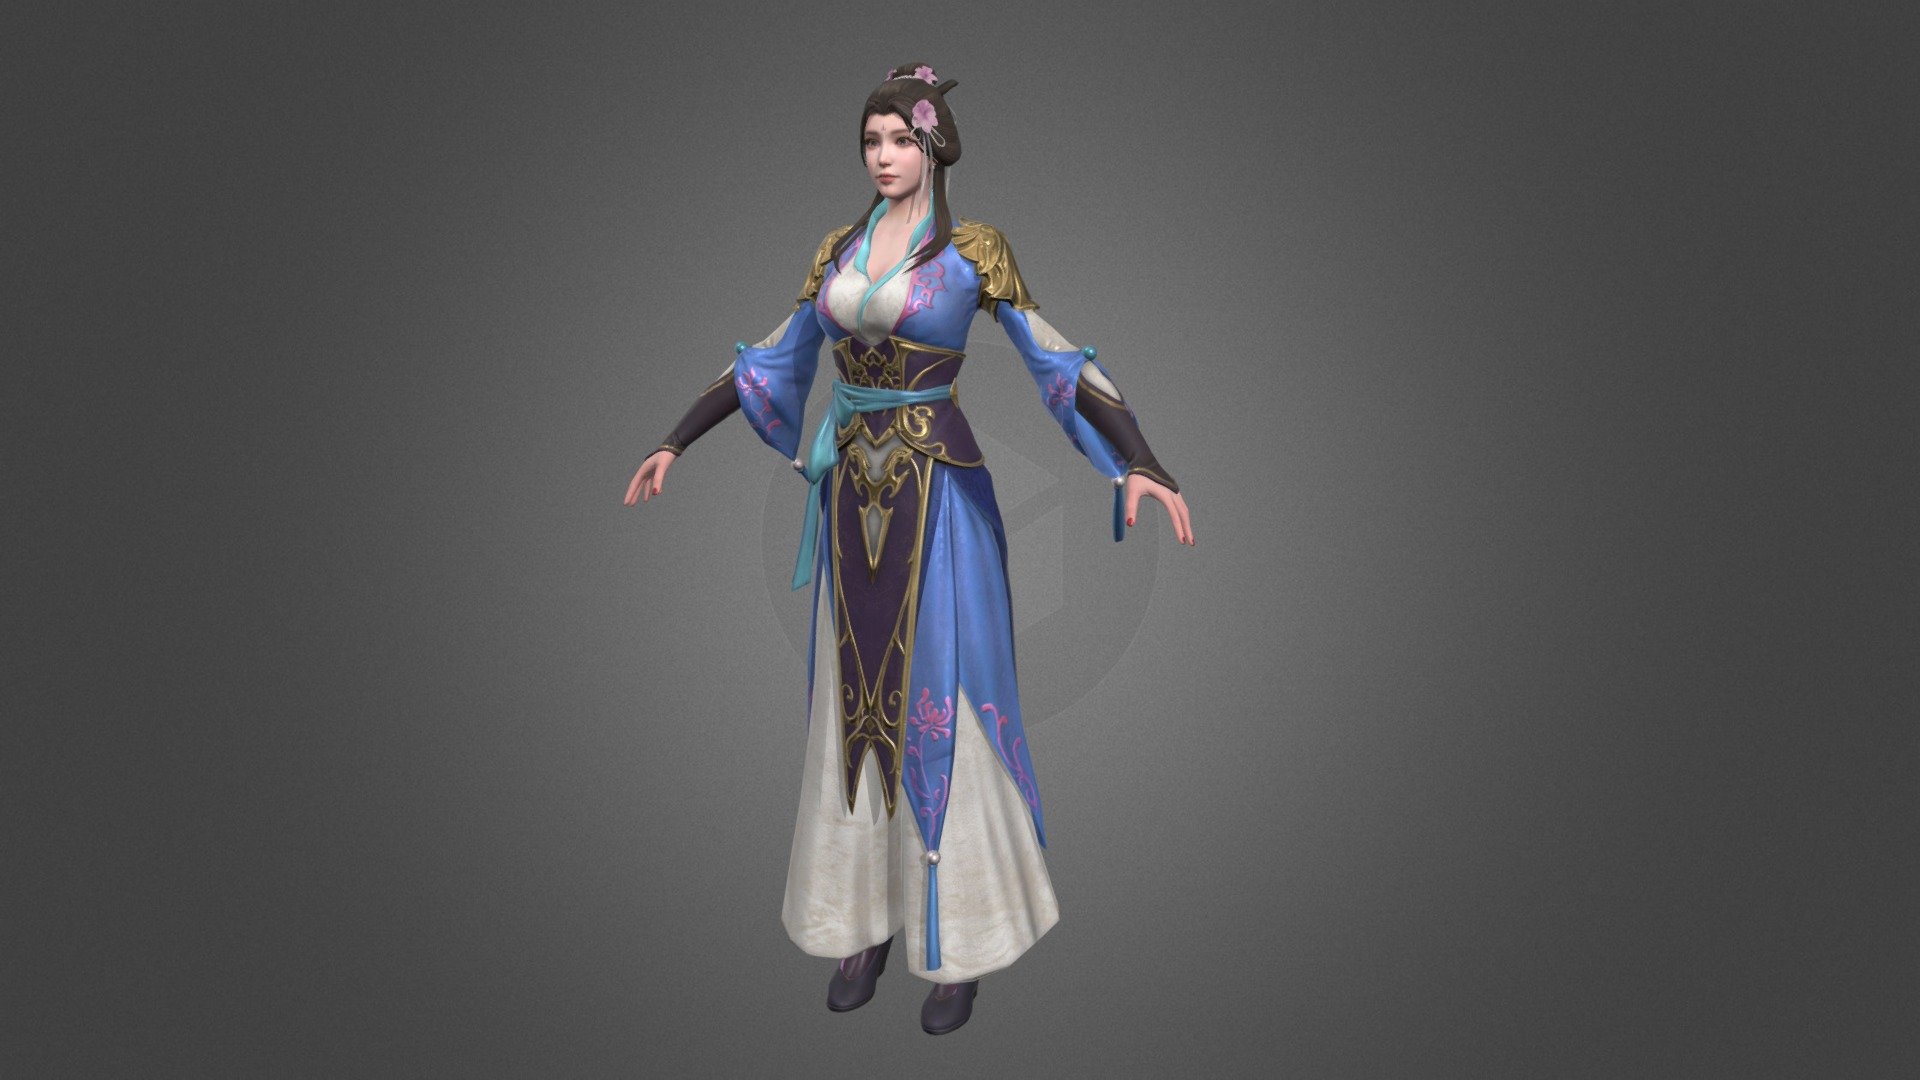 Sangokushi style Outsourced production of game characters - Game character production - 3D model by MichelleYang513 (@vita513) 3d model